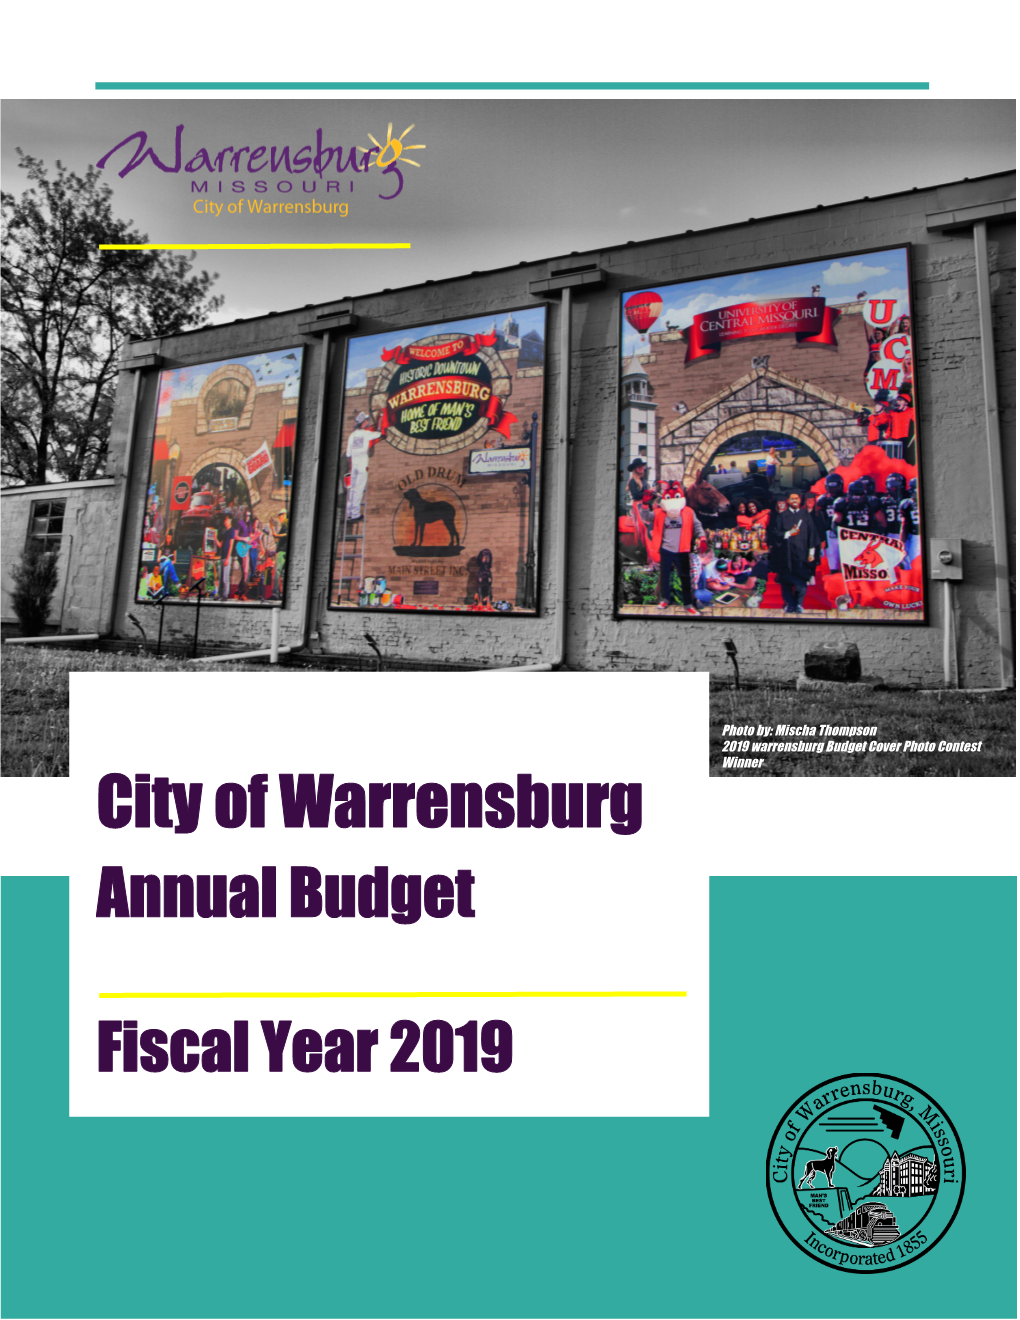 City of Warrensburg Annual Budget